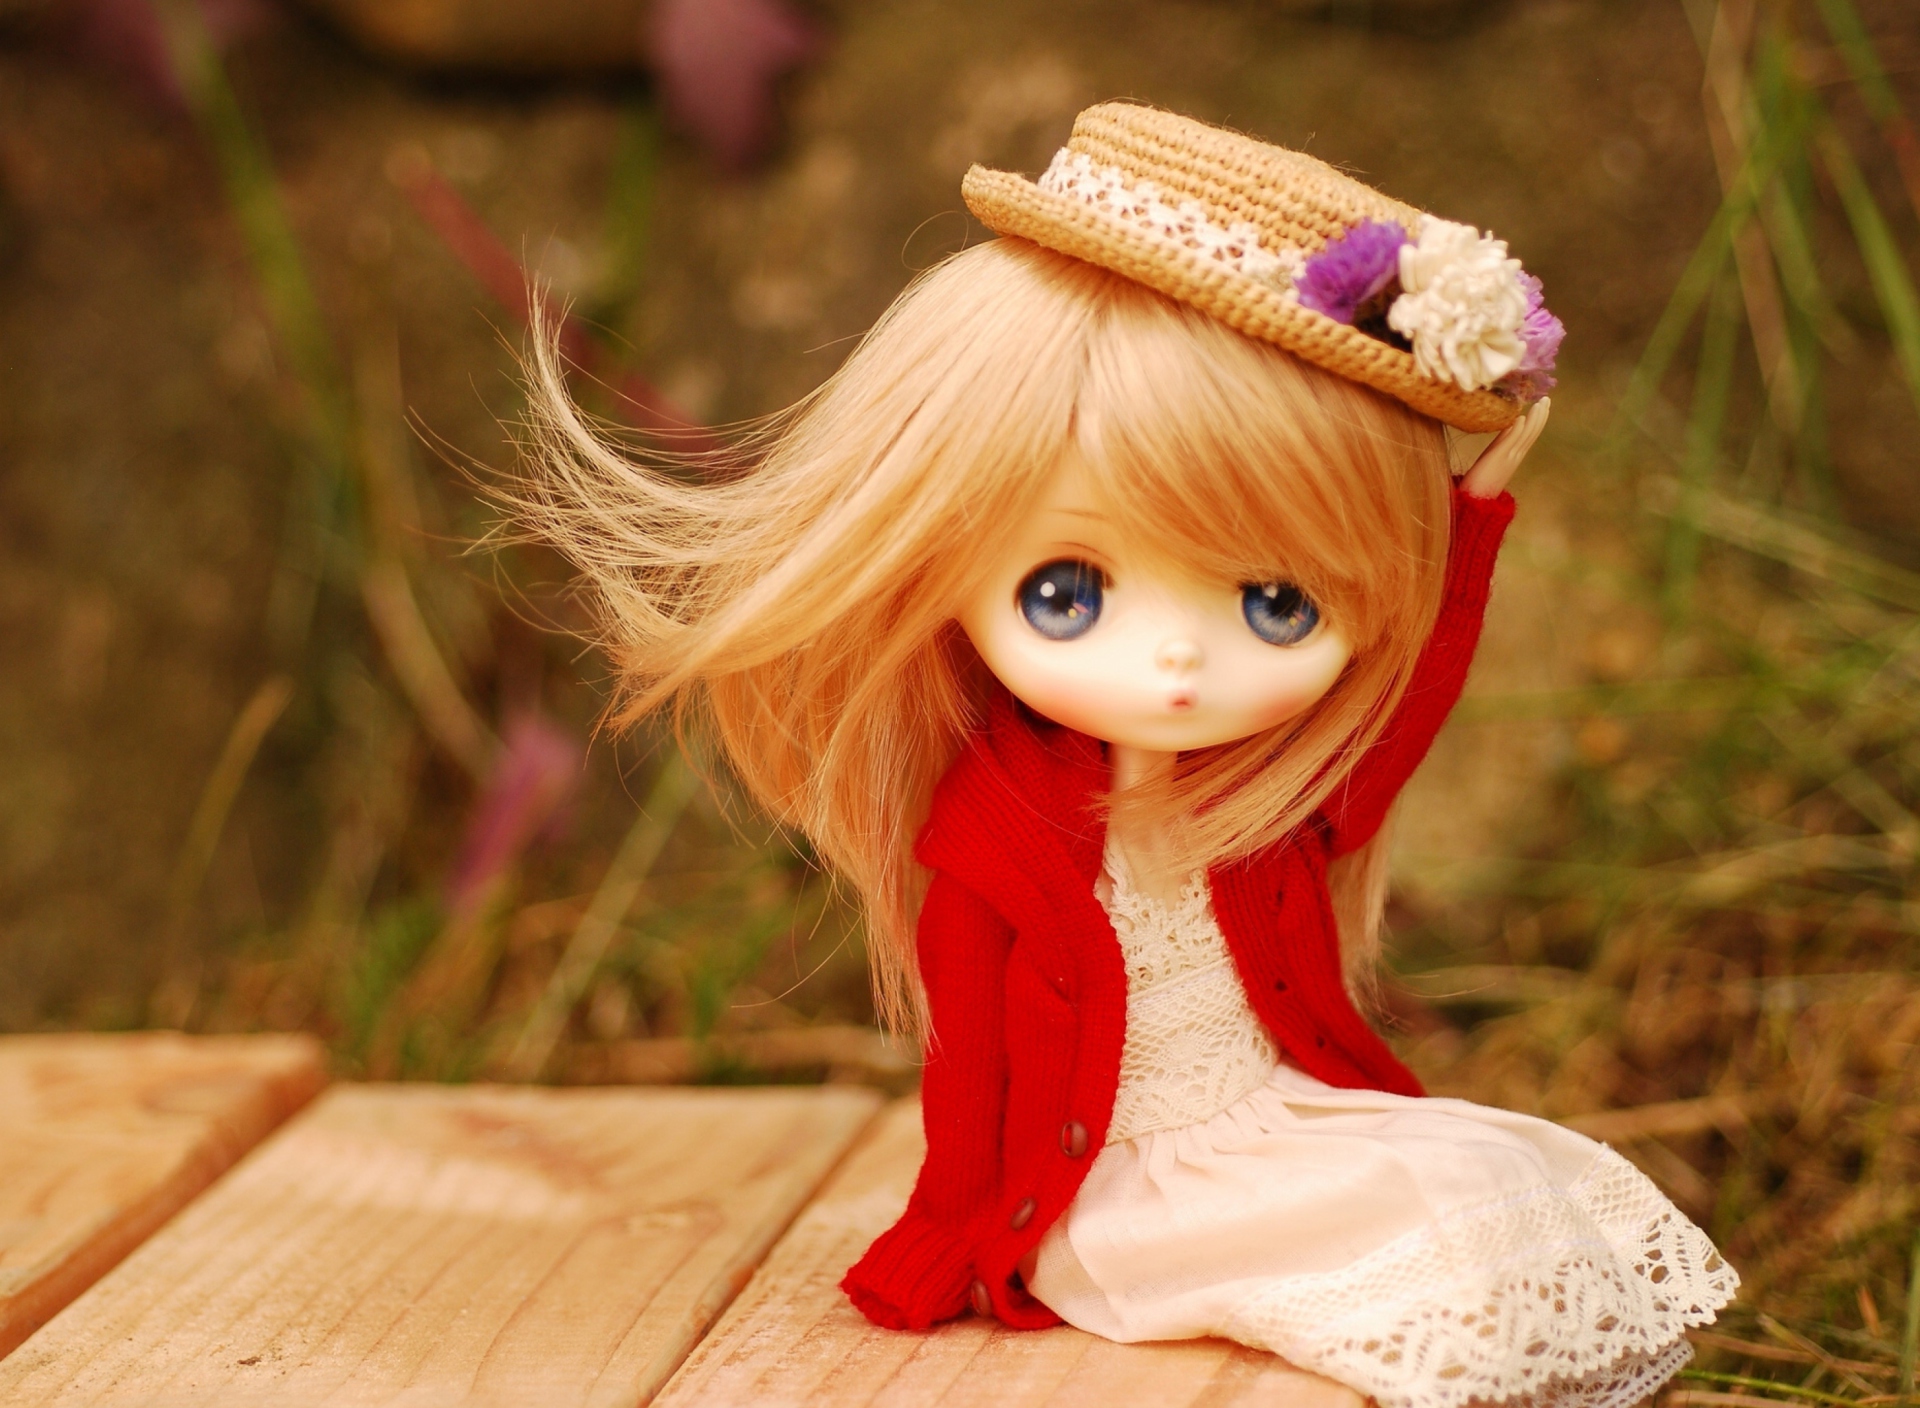 Blonde Doll In Romantic Dress And Hat screenshot #1 1920x1408